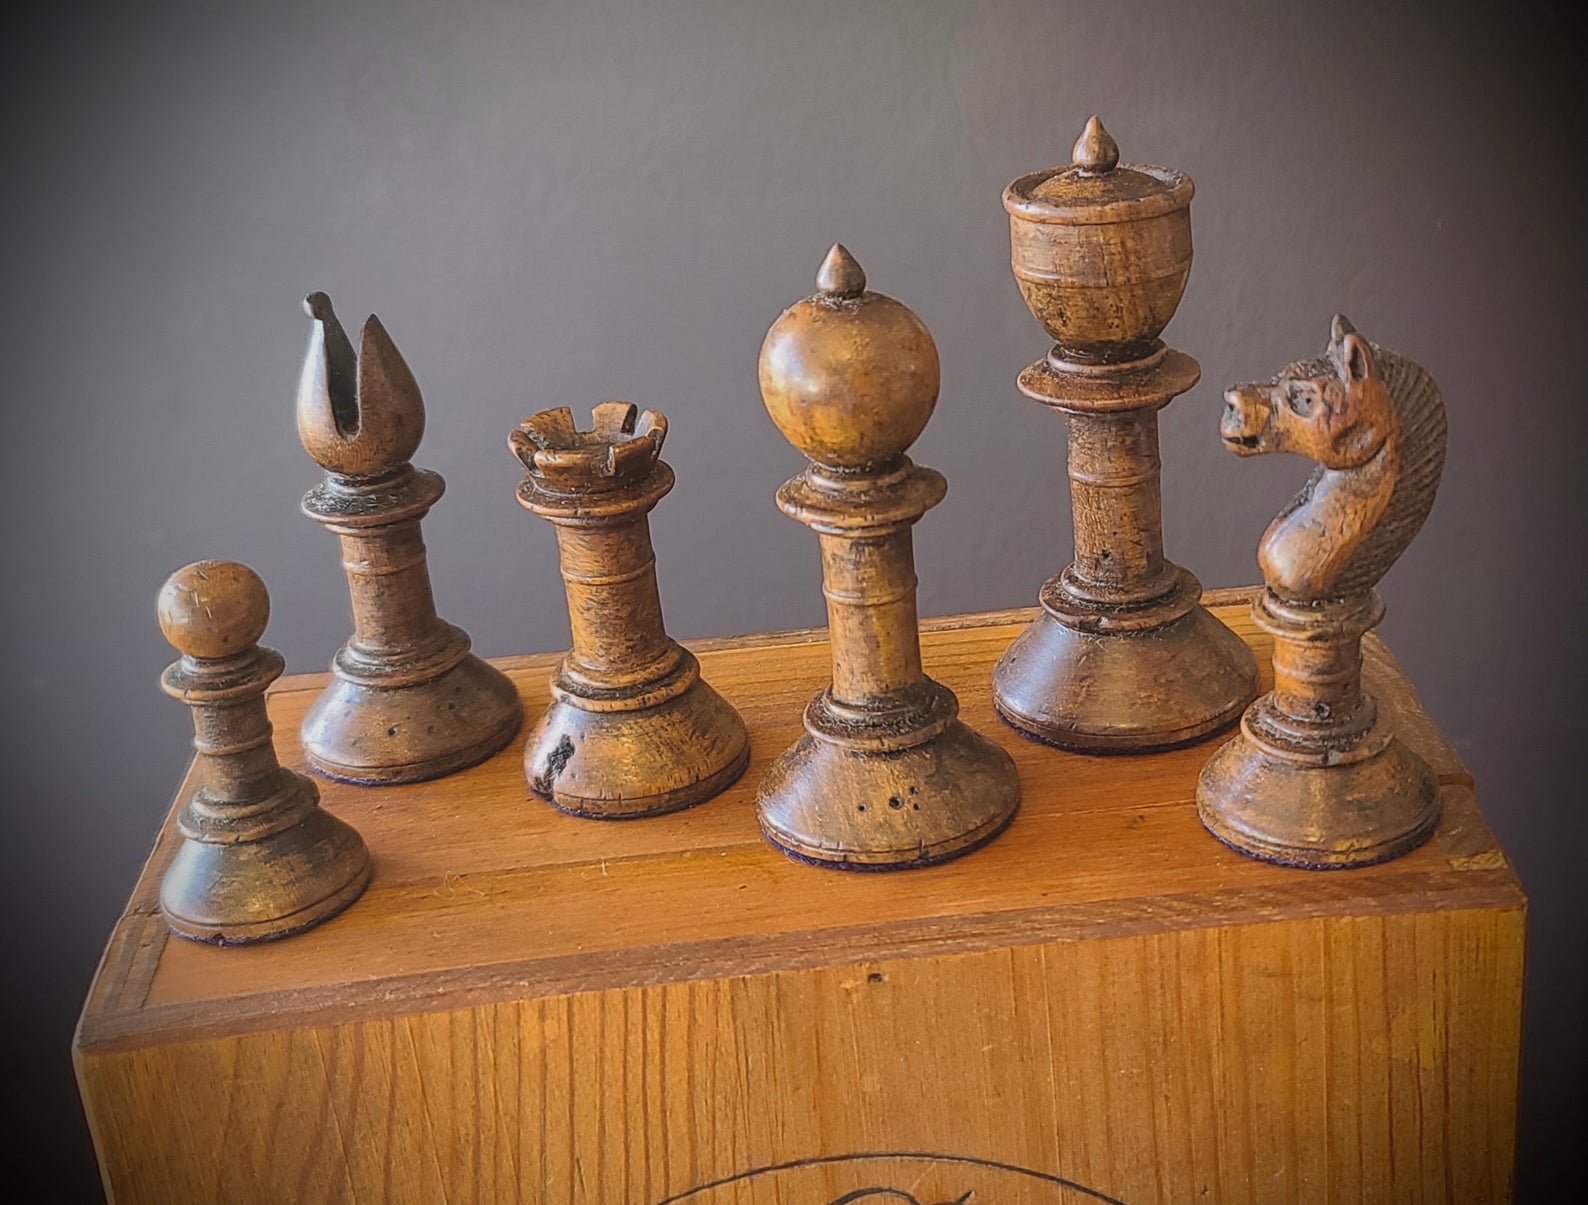 Old English Classic Chess Set with Gold Rosewood & Boxwood Pieces